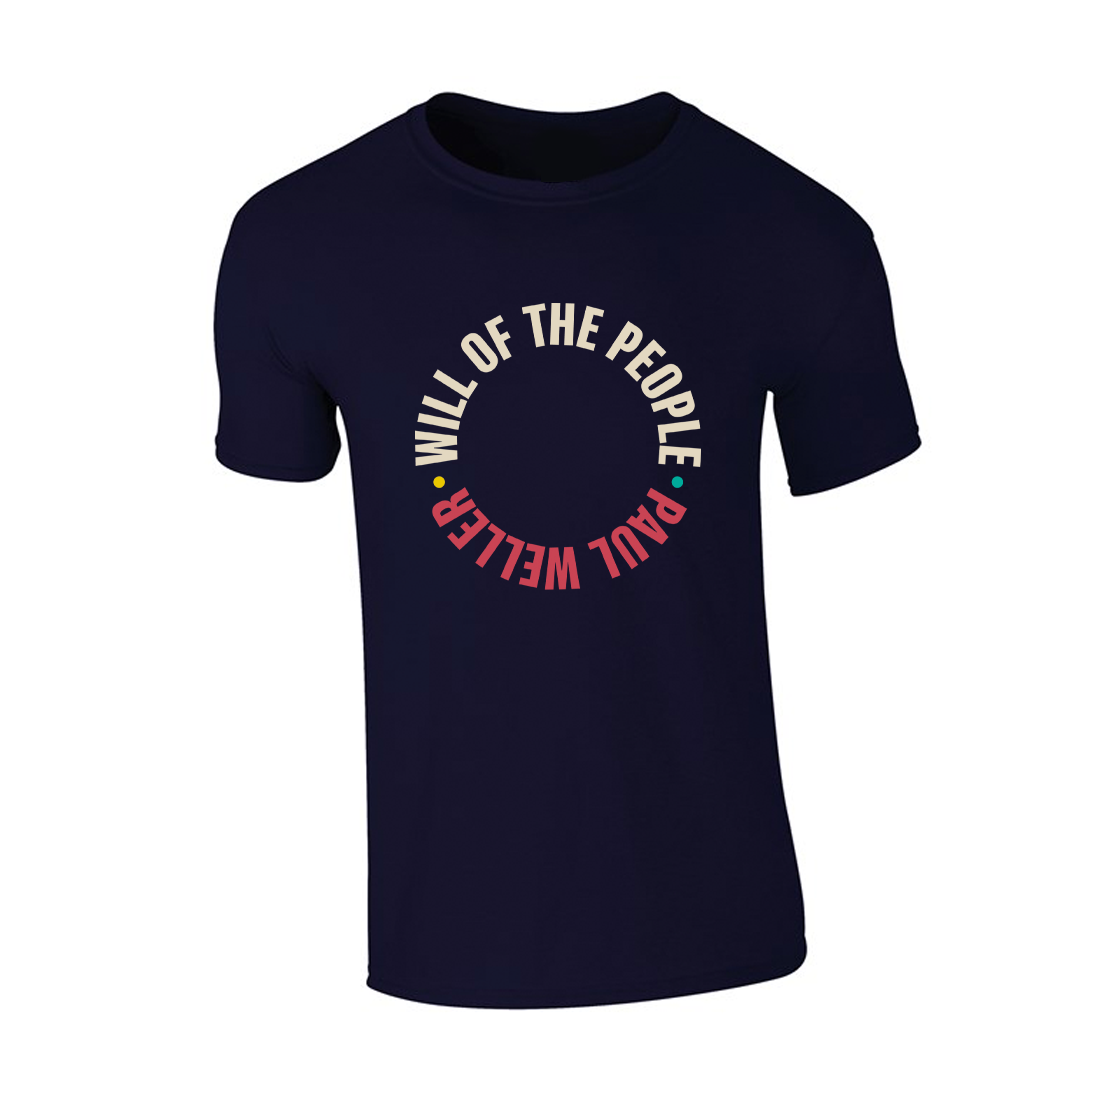 Paul Weller - Will of the People T-Shirt